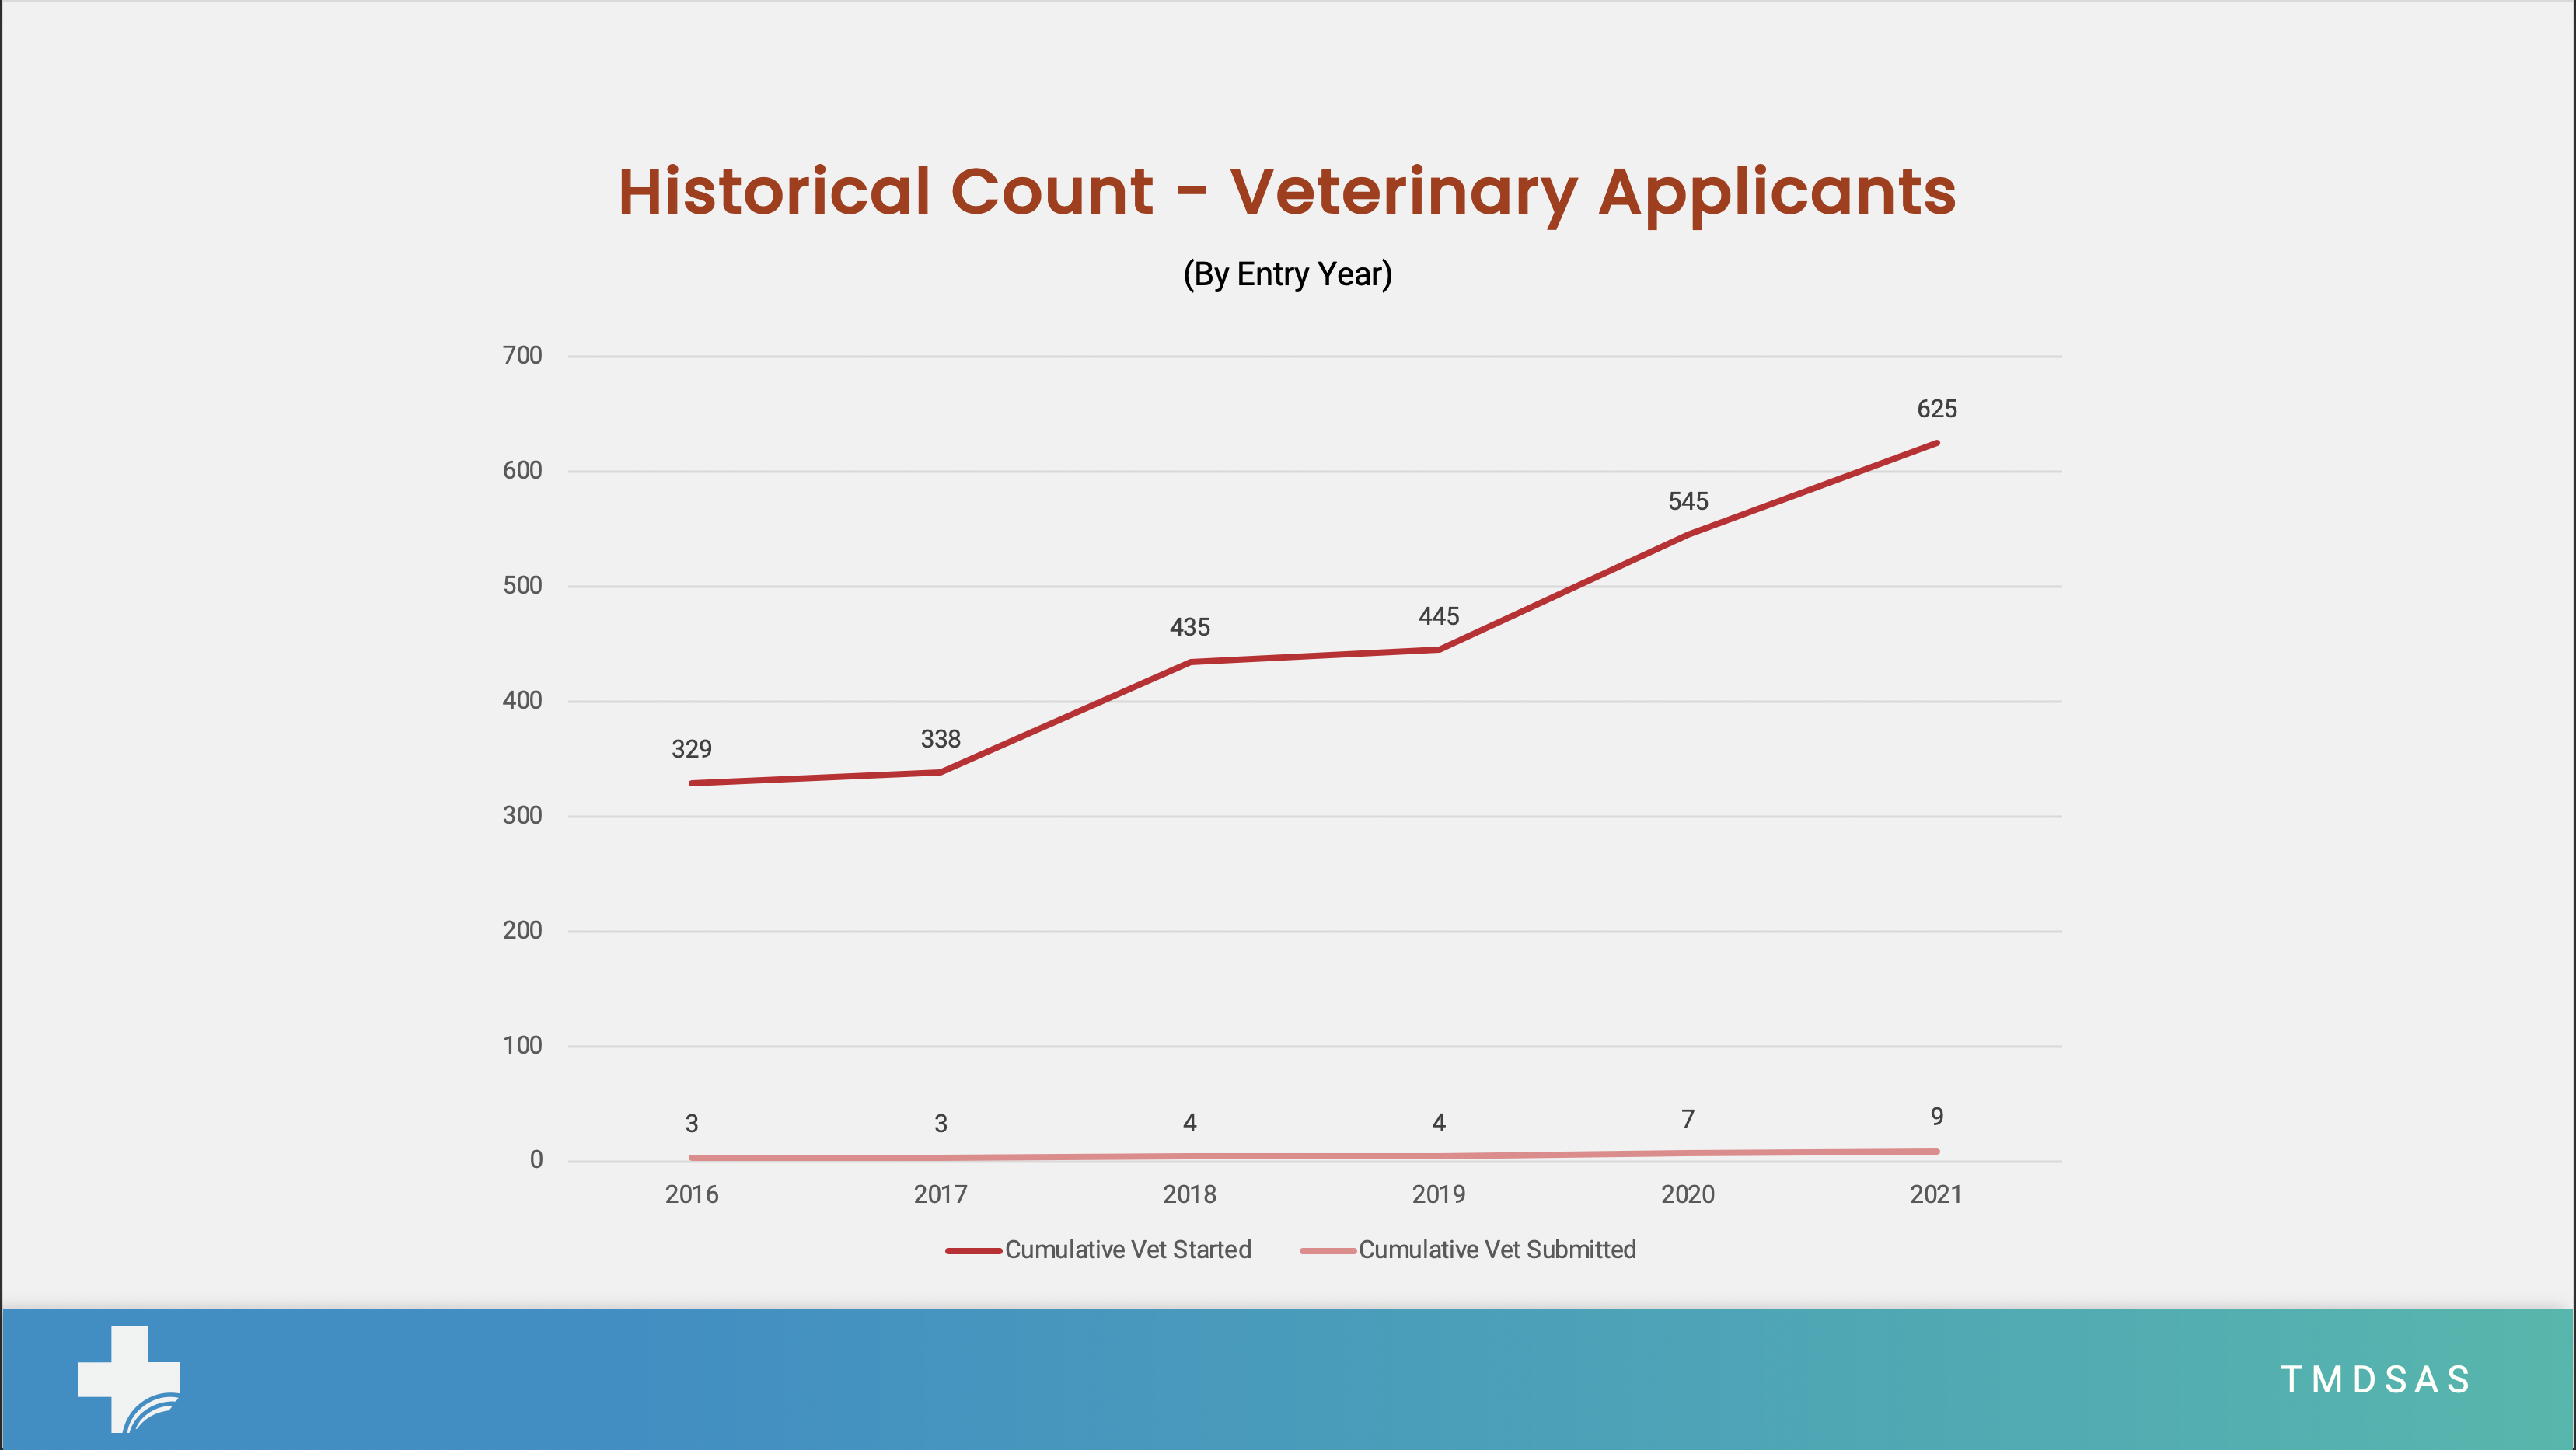 EY21 Veterinary Applications as of June 15, 2020